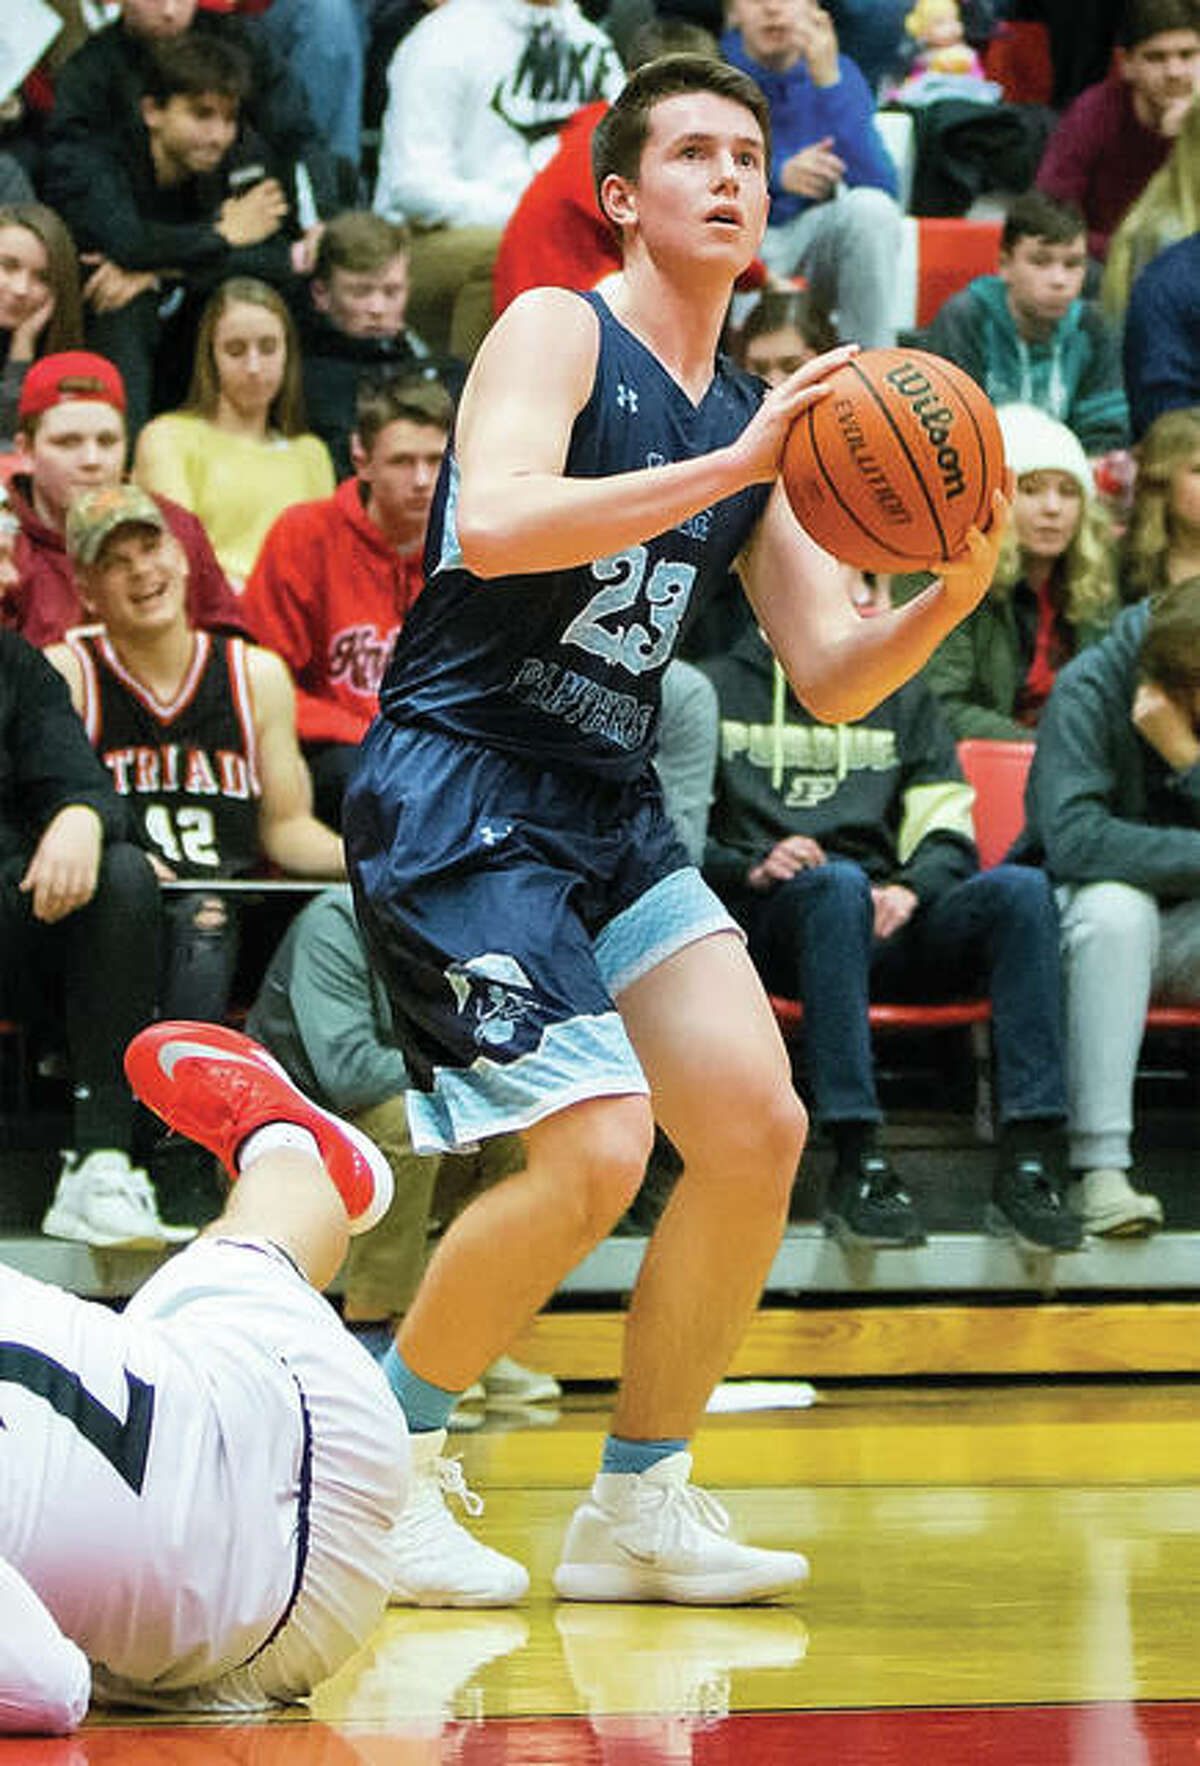 Jersey’s Cody Gibson looks to the basket after a Triad defender falls to the floor during a Panthers win Jan. 5 in Troy. The Panthers were back home Tuesday night at Havens Gym in Jerseyville and fell to Mount Vernon in overtime.